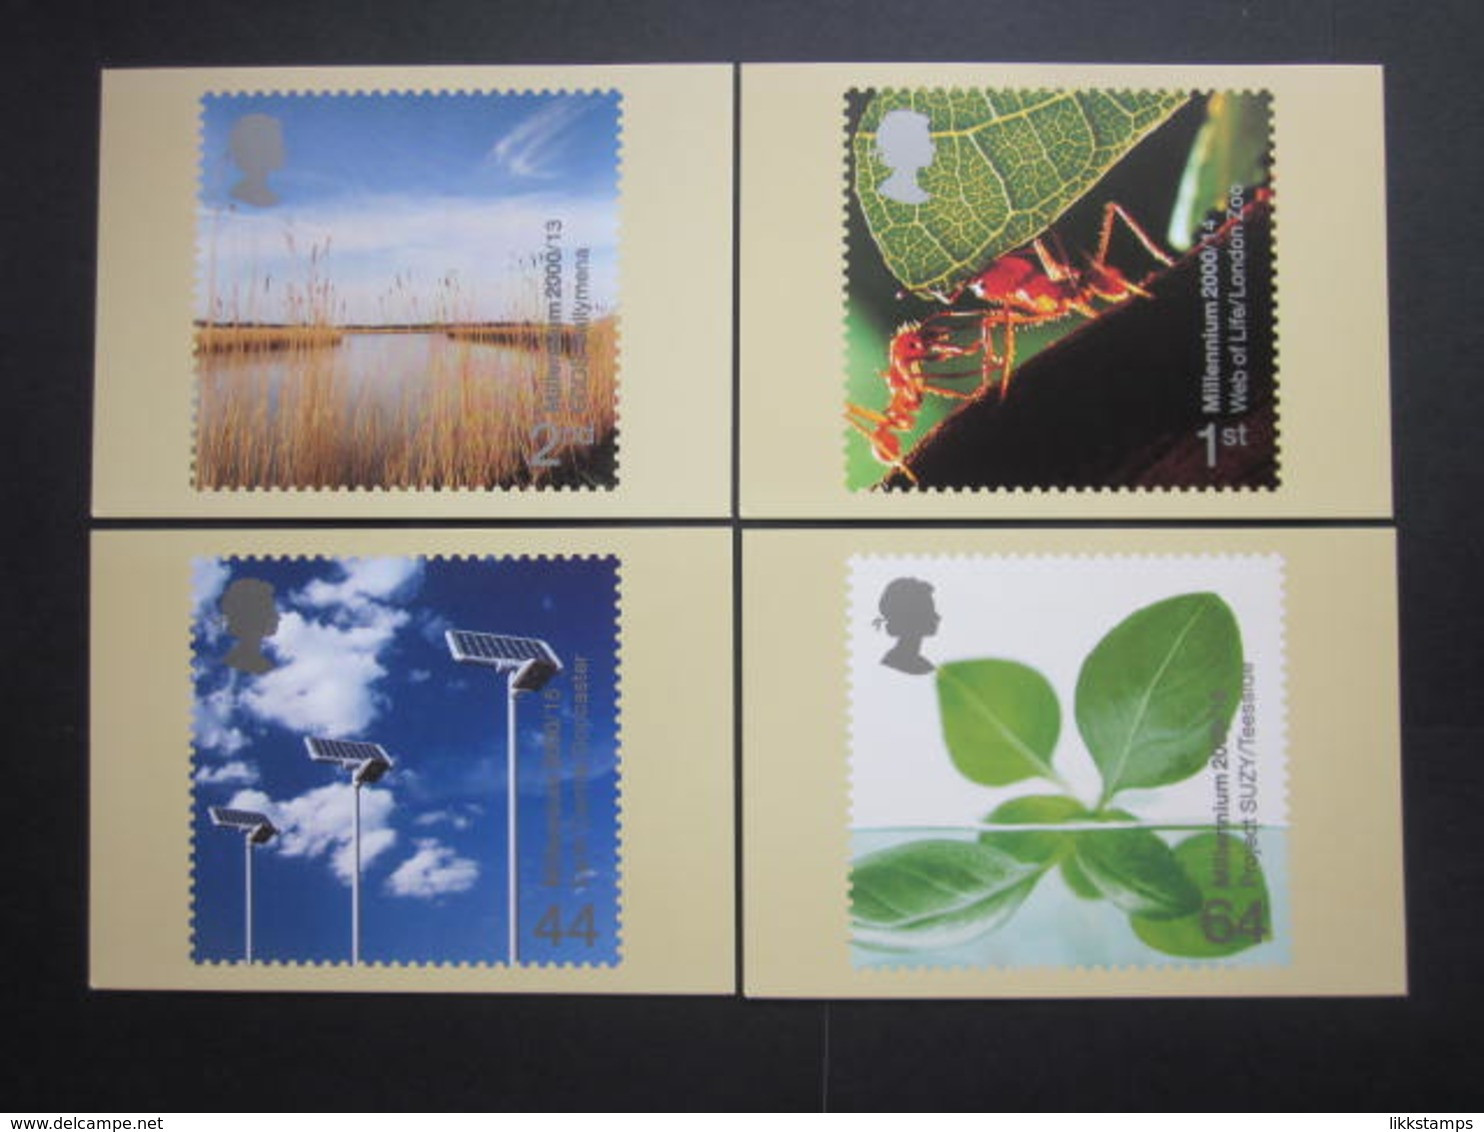 2000 'LIFE AND EARTH' STAMPS P.H.Q. CARDS UNUSED, ISSUE No. 218 #00637 - PHQ Karten